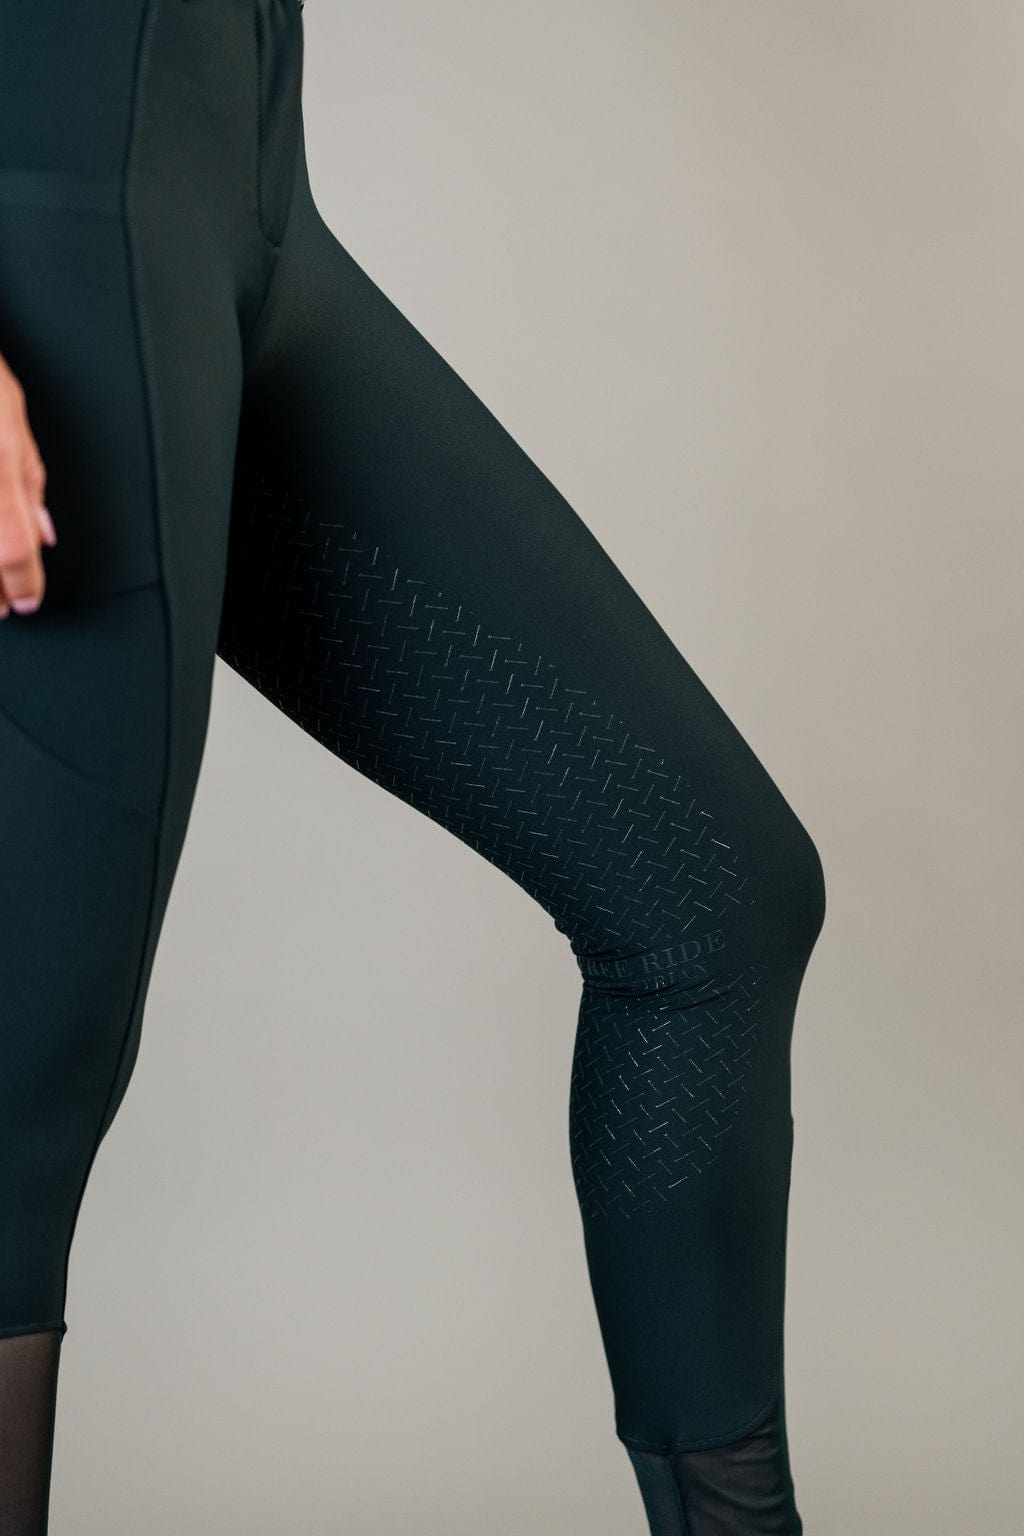 Emerald Lux | Full Seat or Knee Patch (Zip-up)